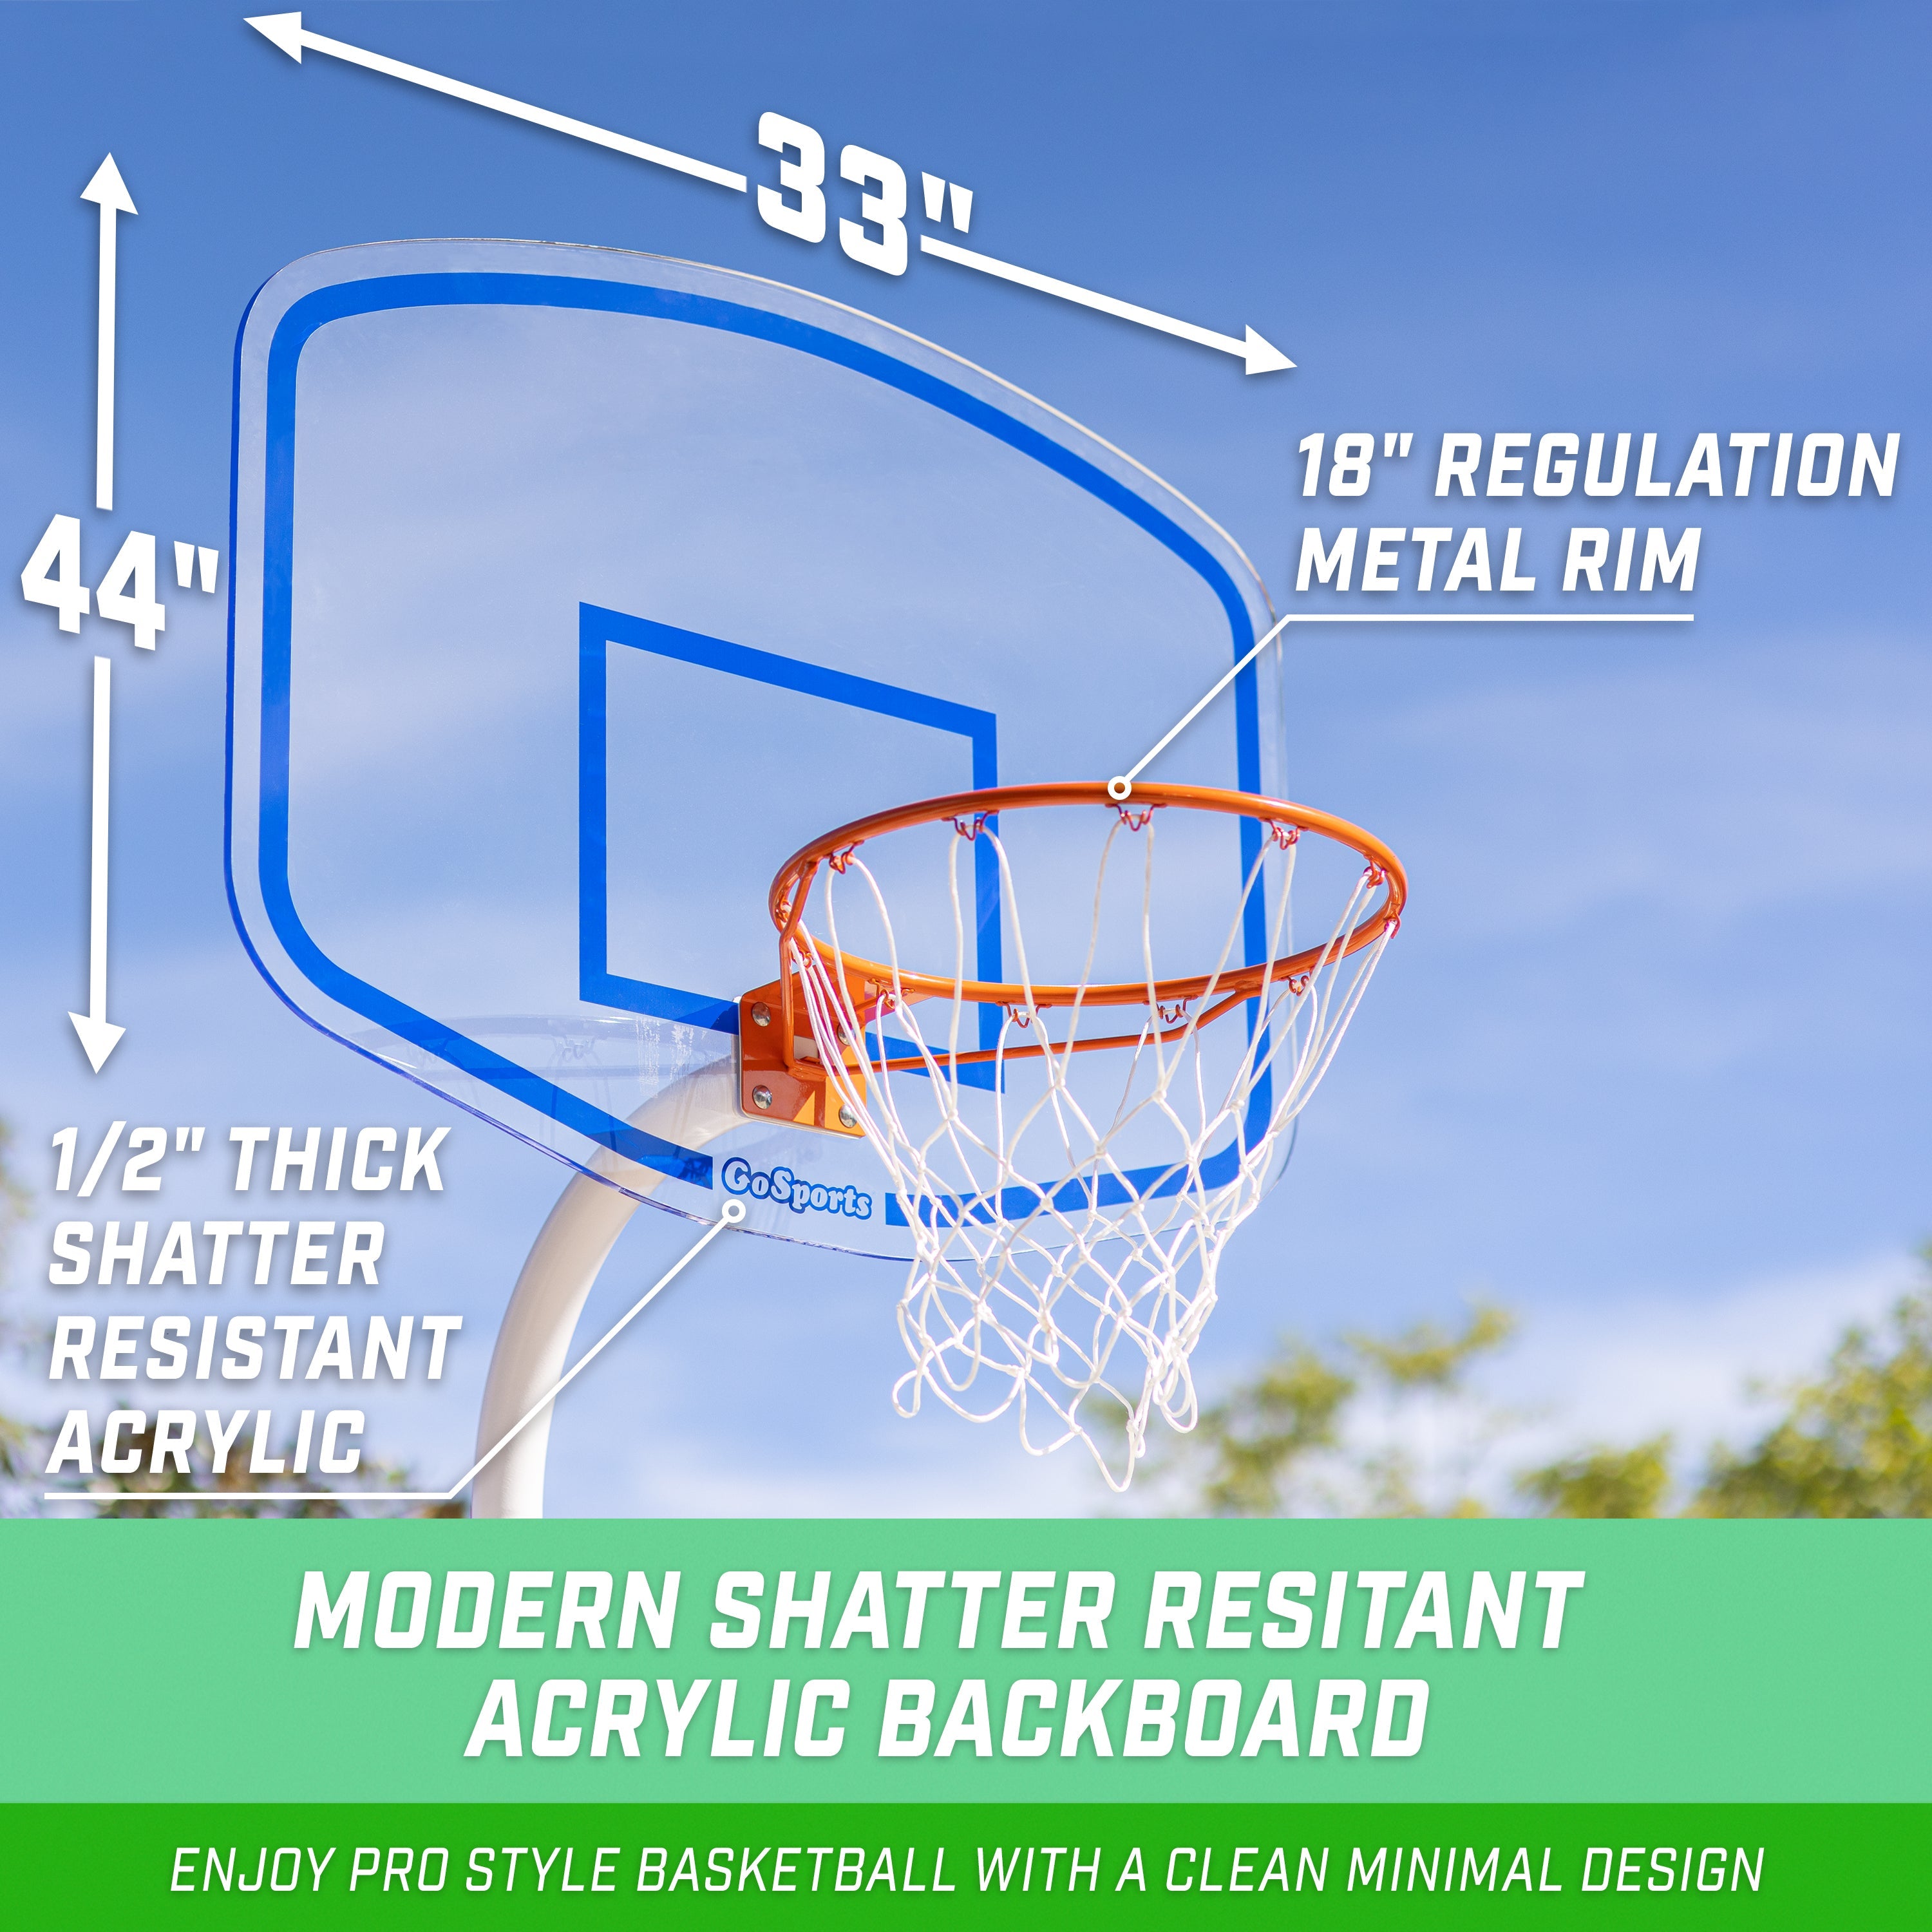 Basketball Hoop Net Durable Professional for Sports Hall Outdoor Accessories